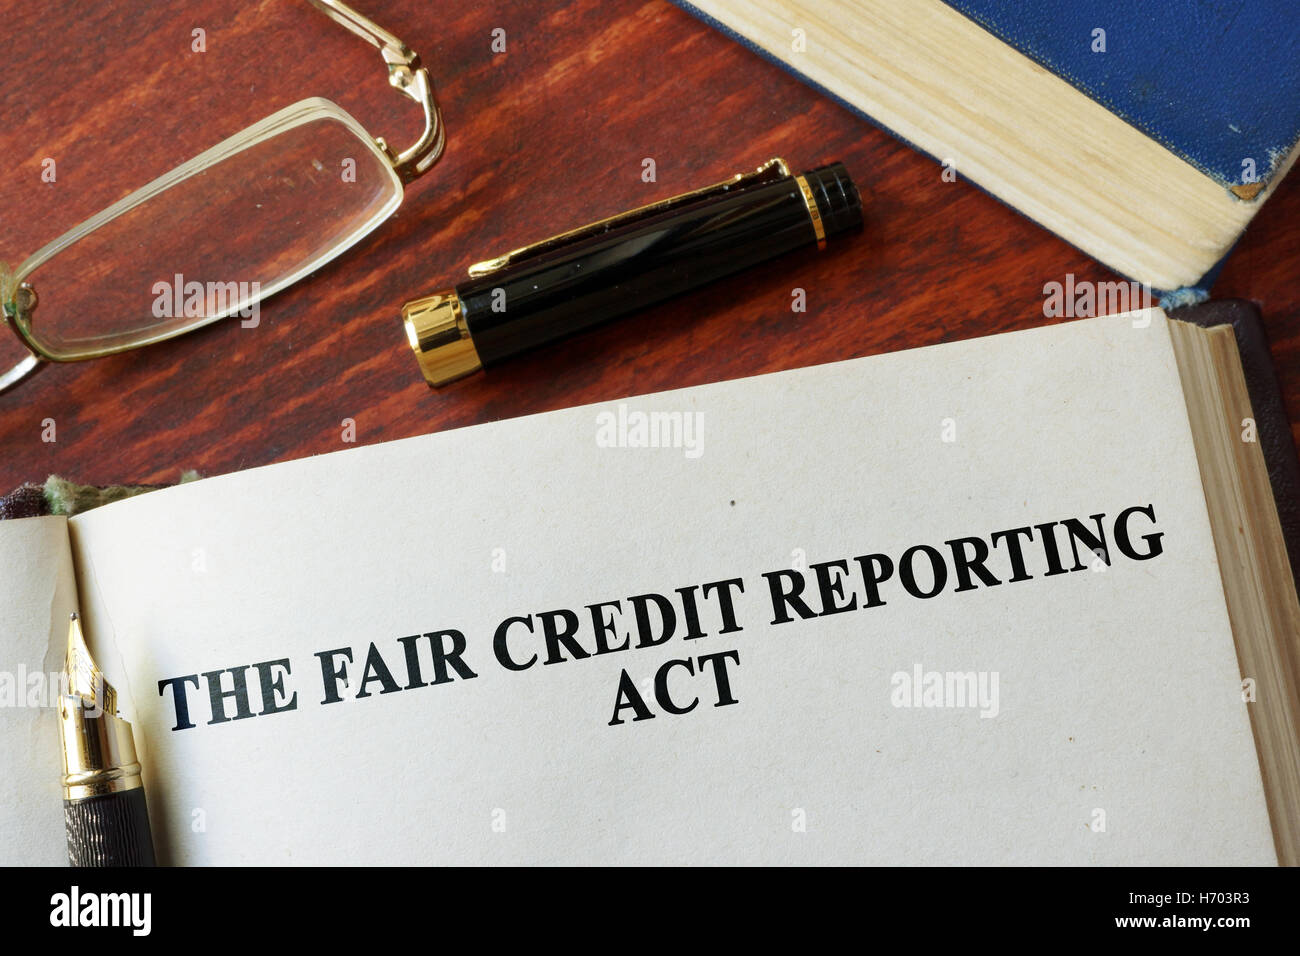 The Fair Credit Reporting Act  FCRA written on a page. Stock Photo